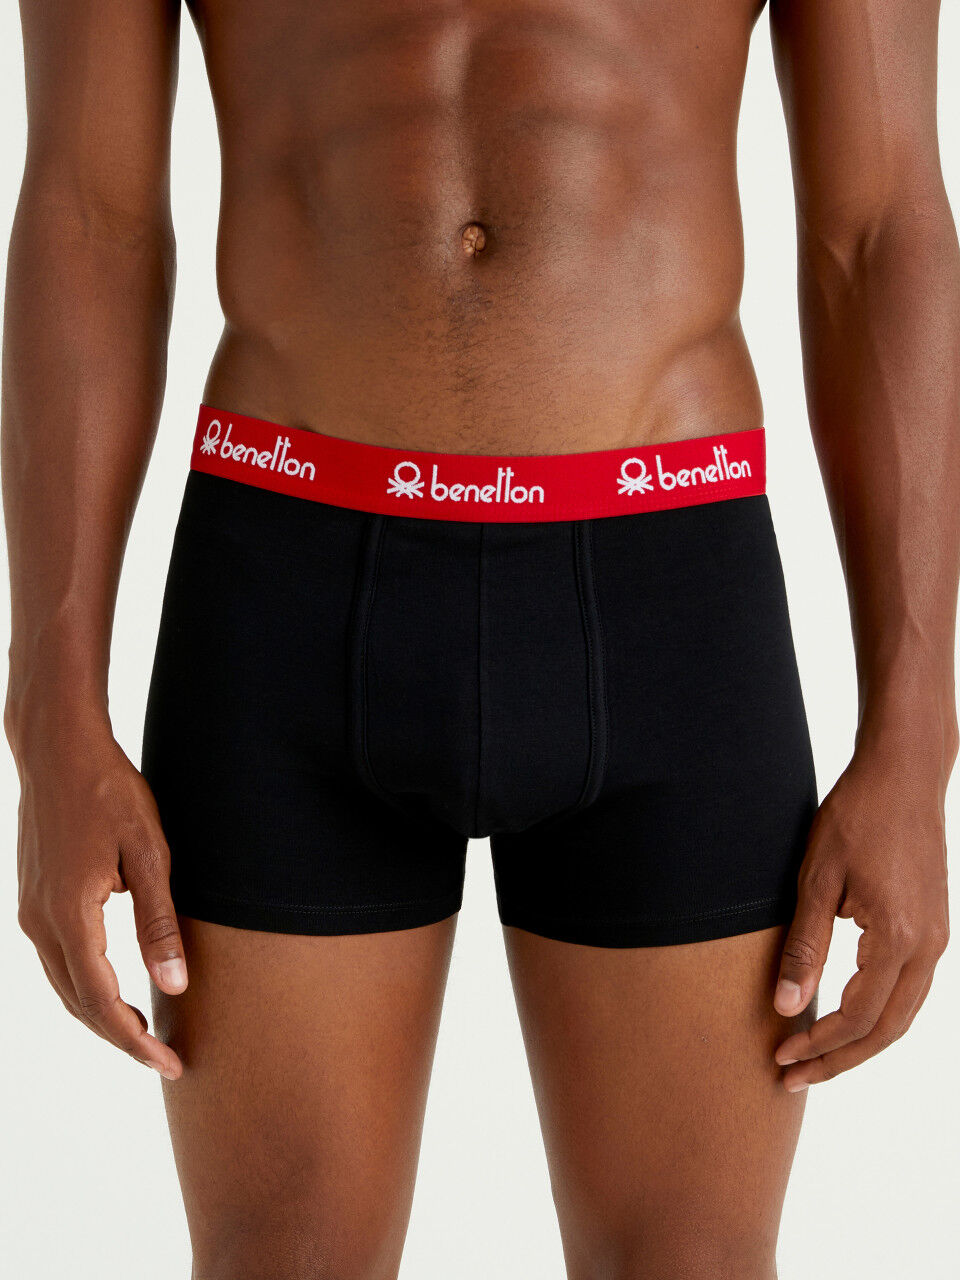 Boxers in stretch organic cotton